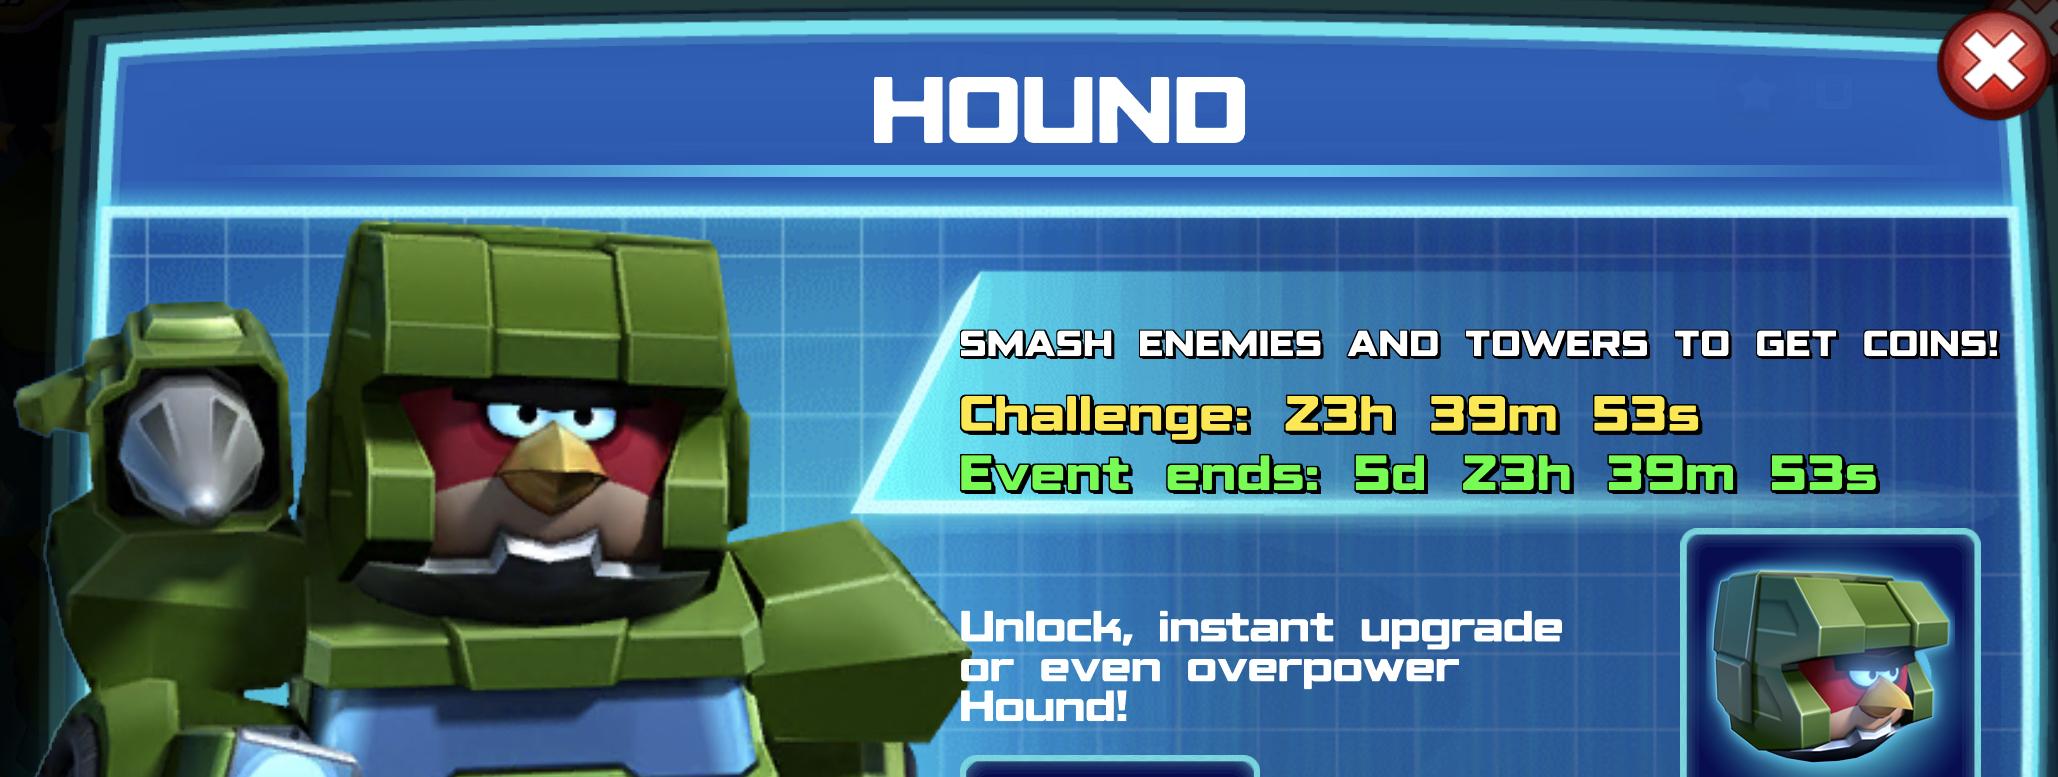 The event banner for Hound